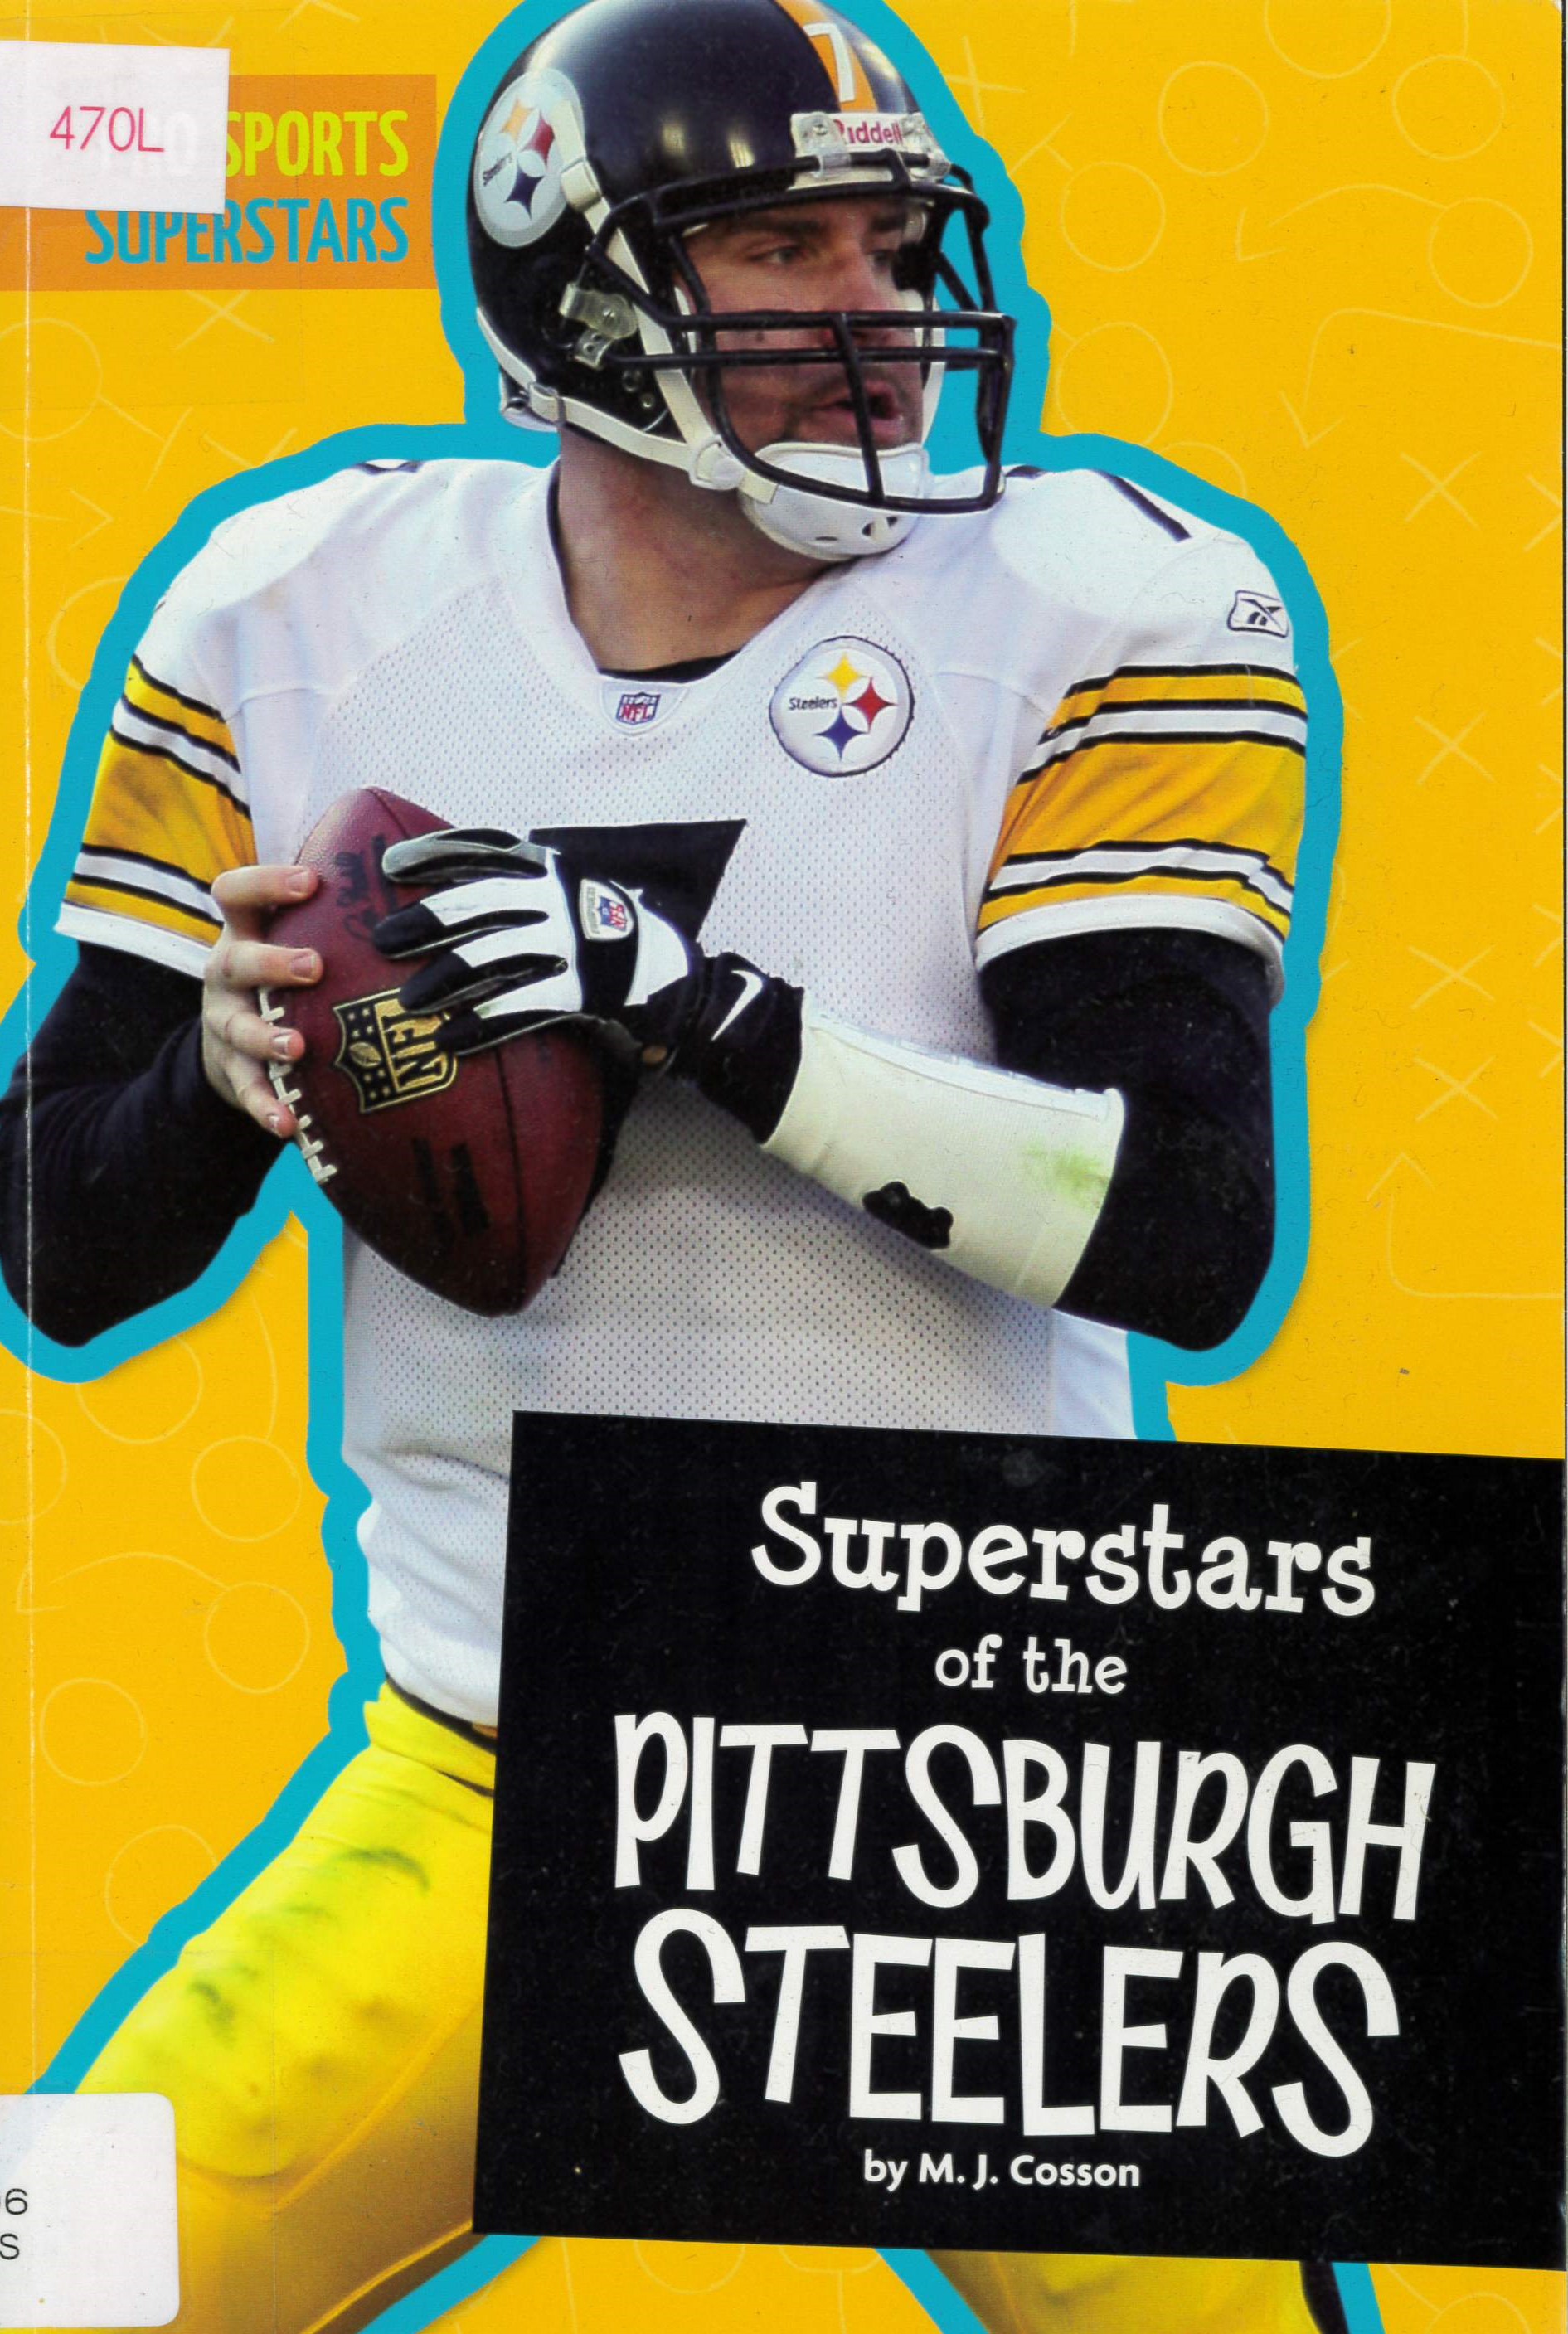 Superstars of the pittsburgh steelers. /